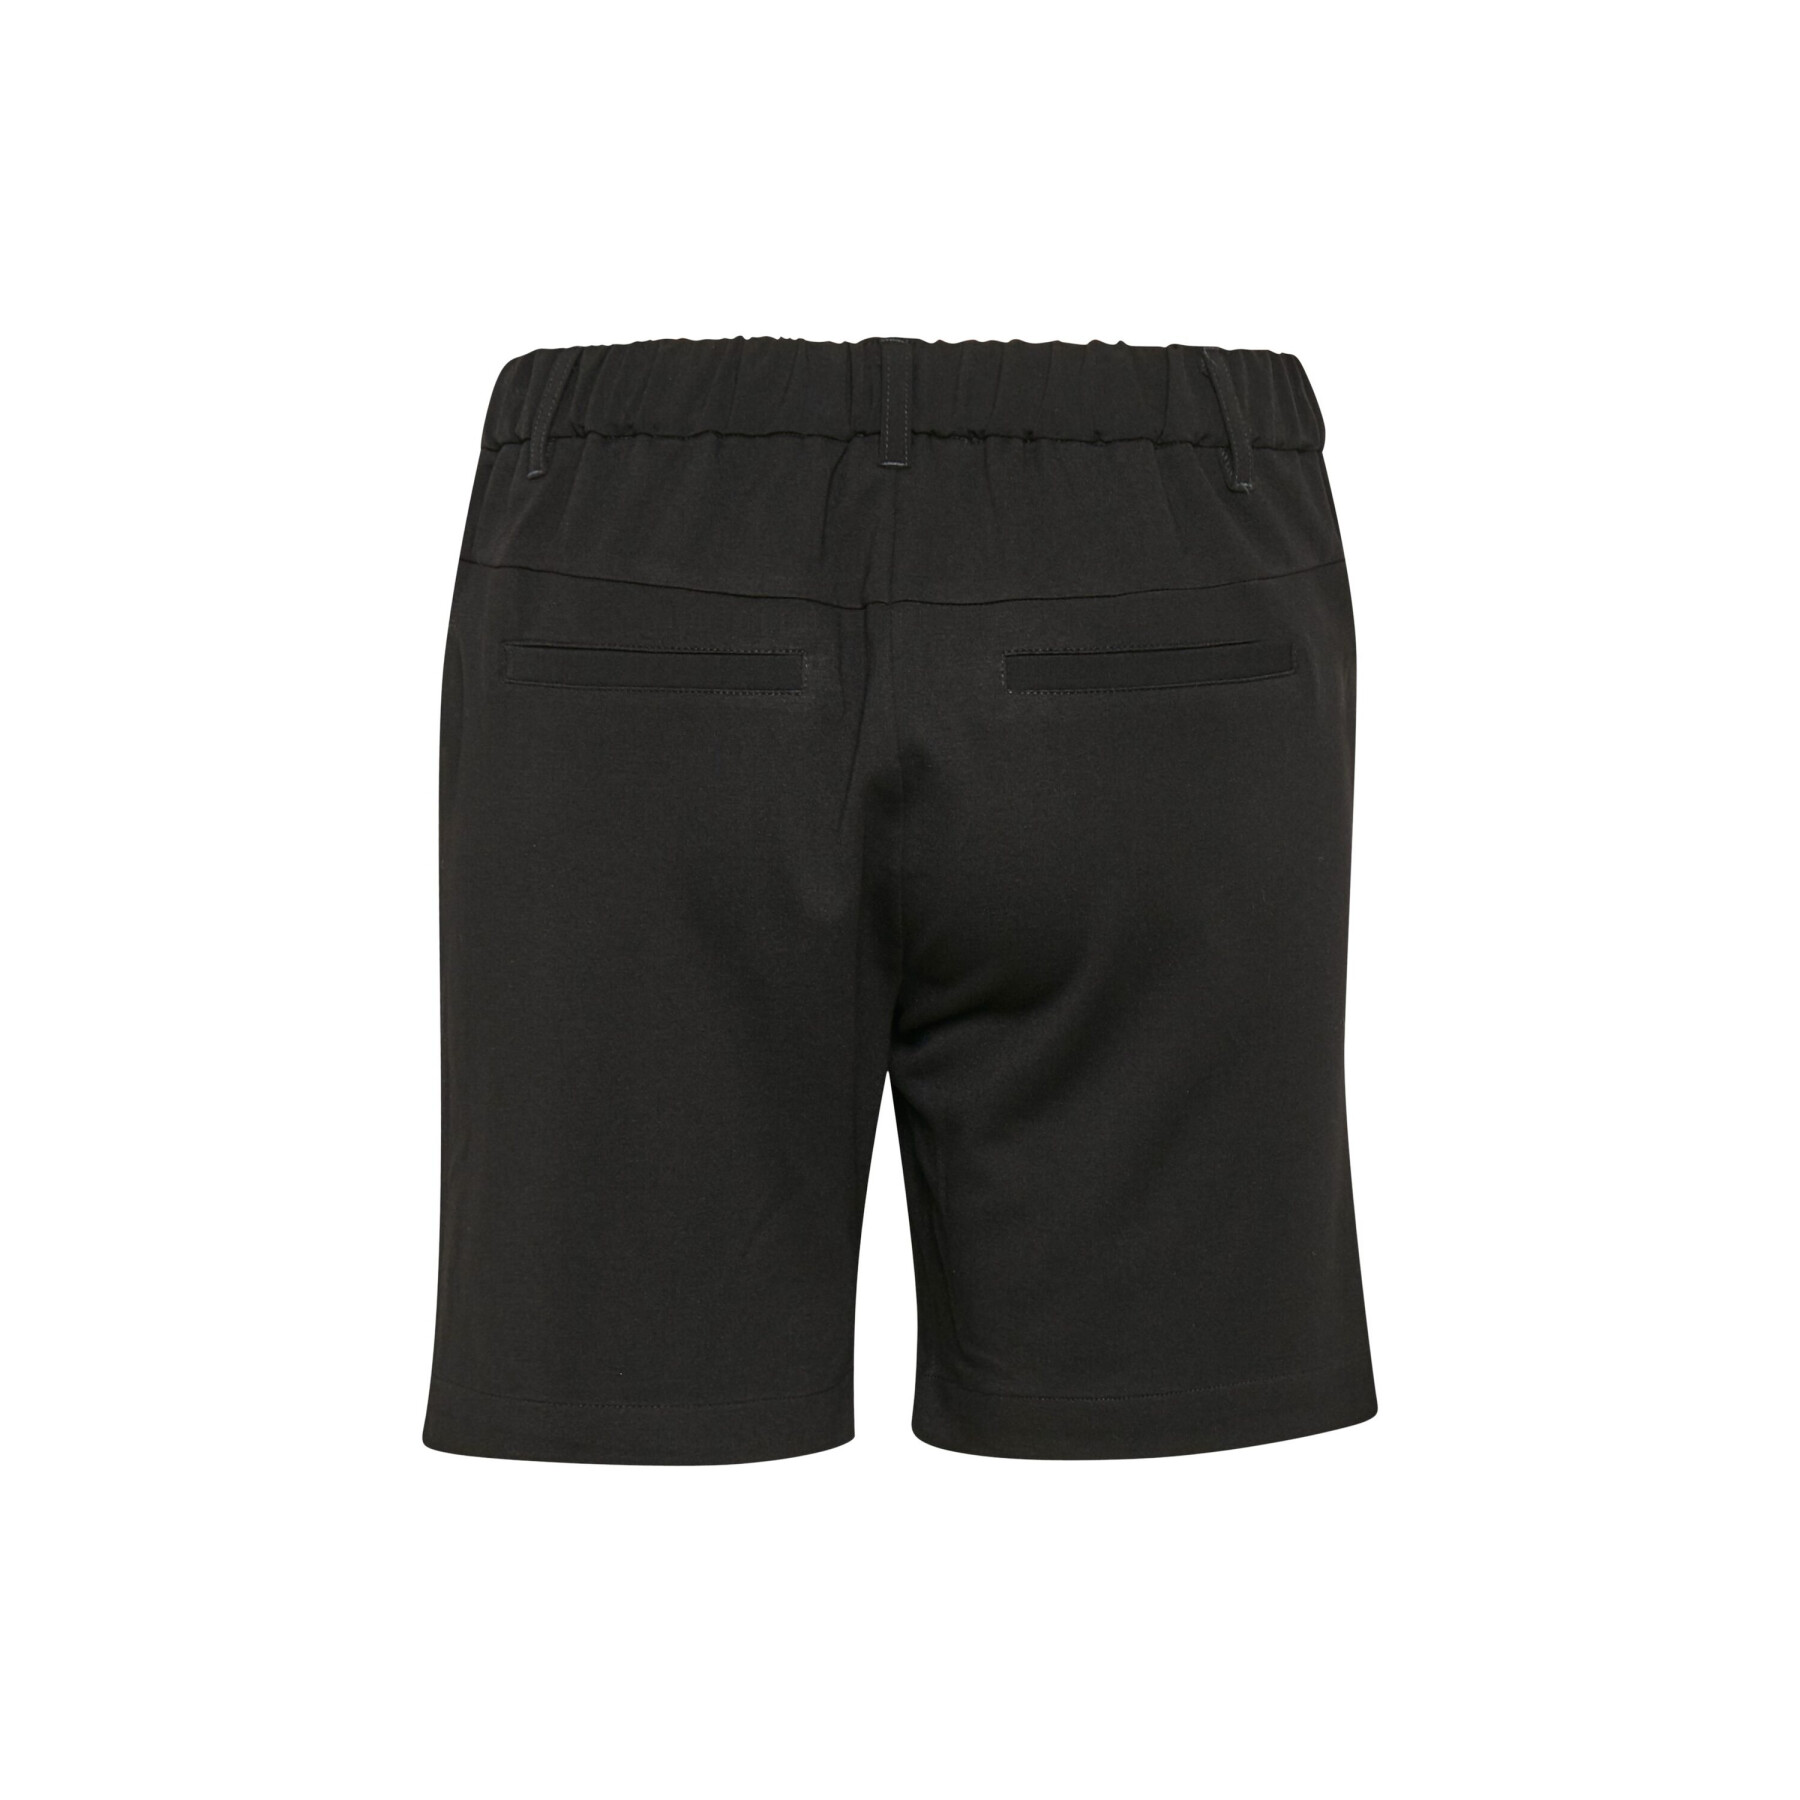 Women's shorts CULTURE Vicky